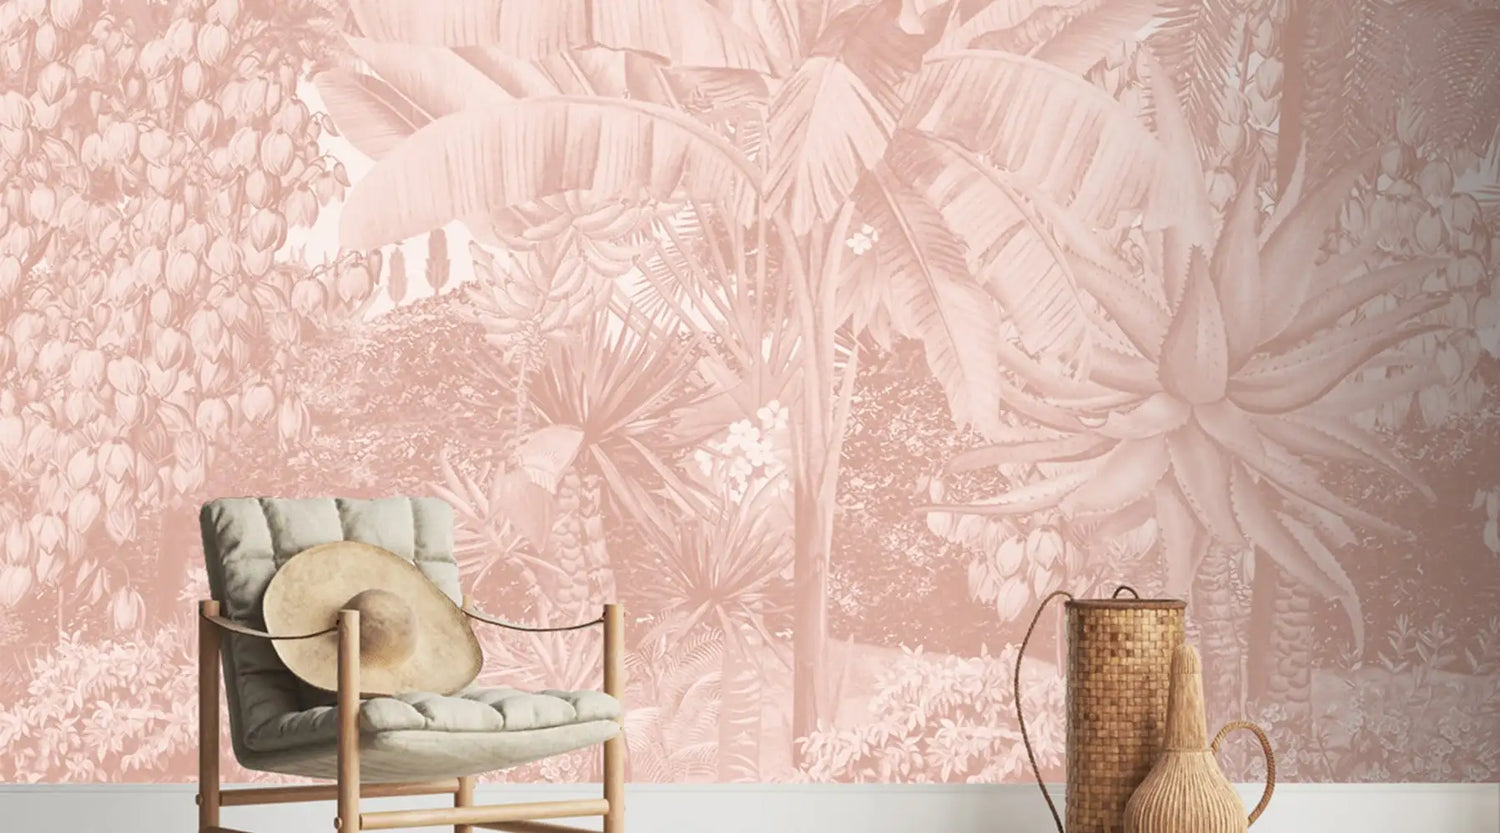 Tranquil Palms Tropical Wallpaper by Life n Colors